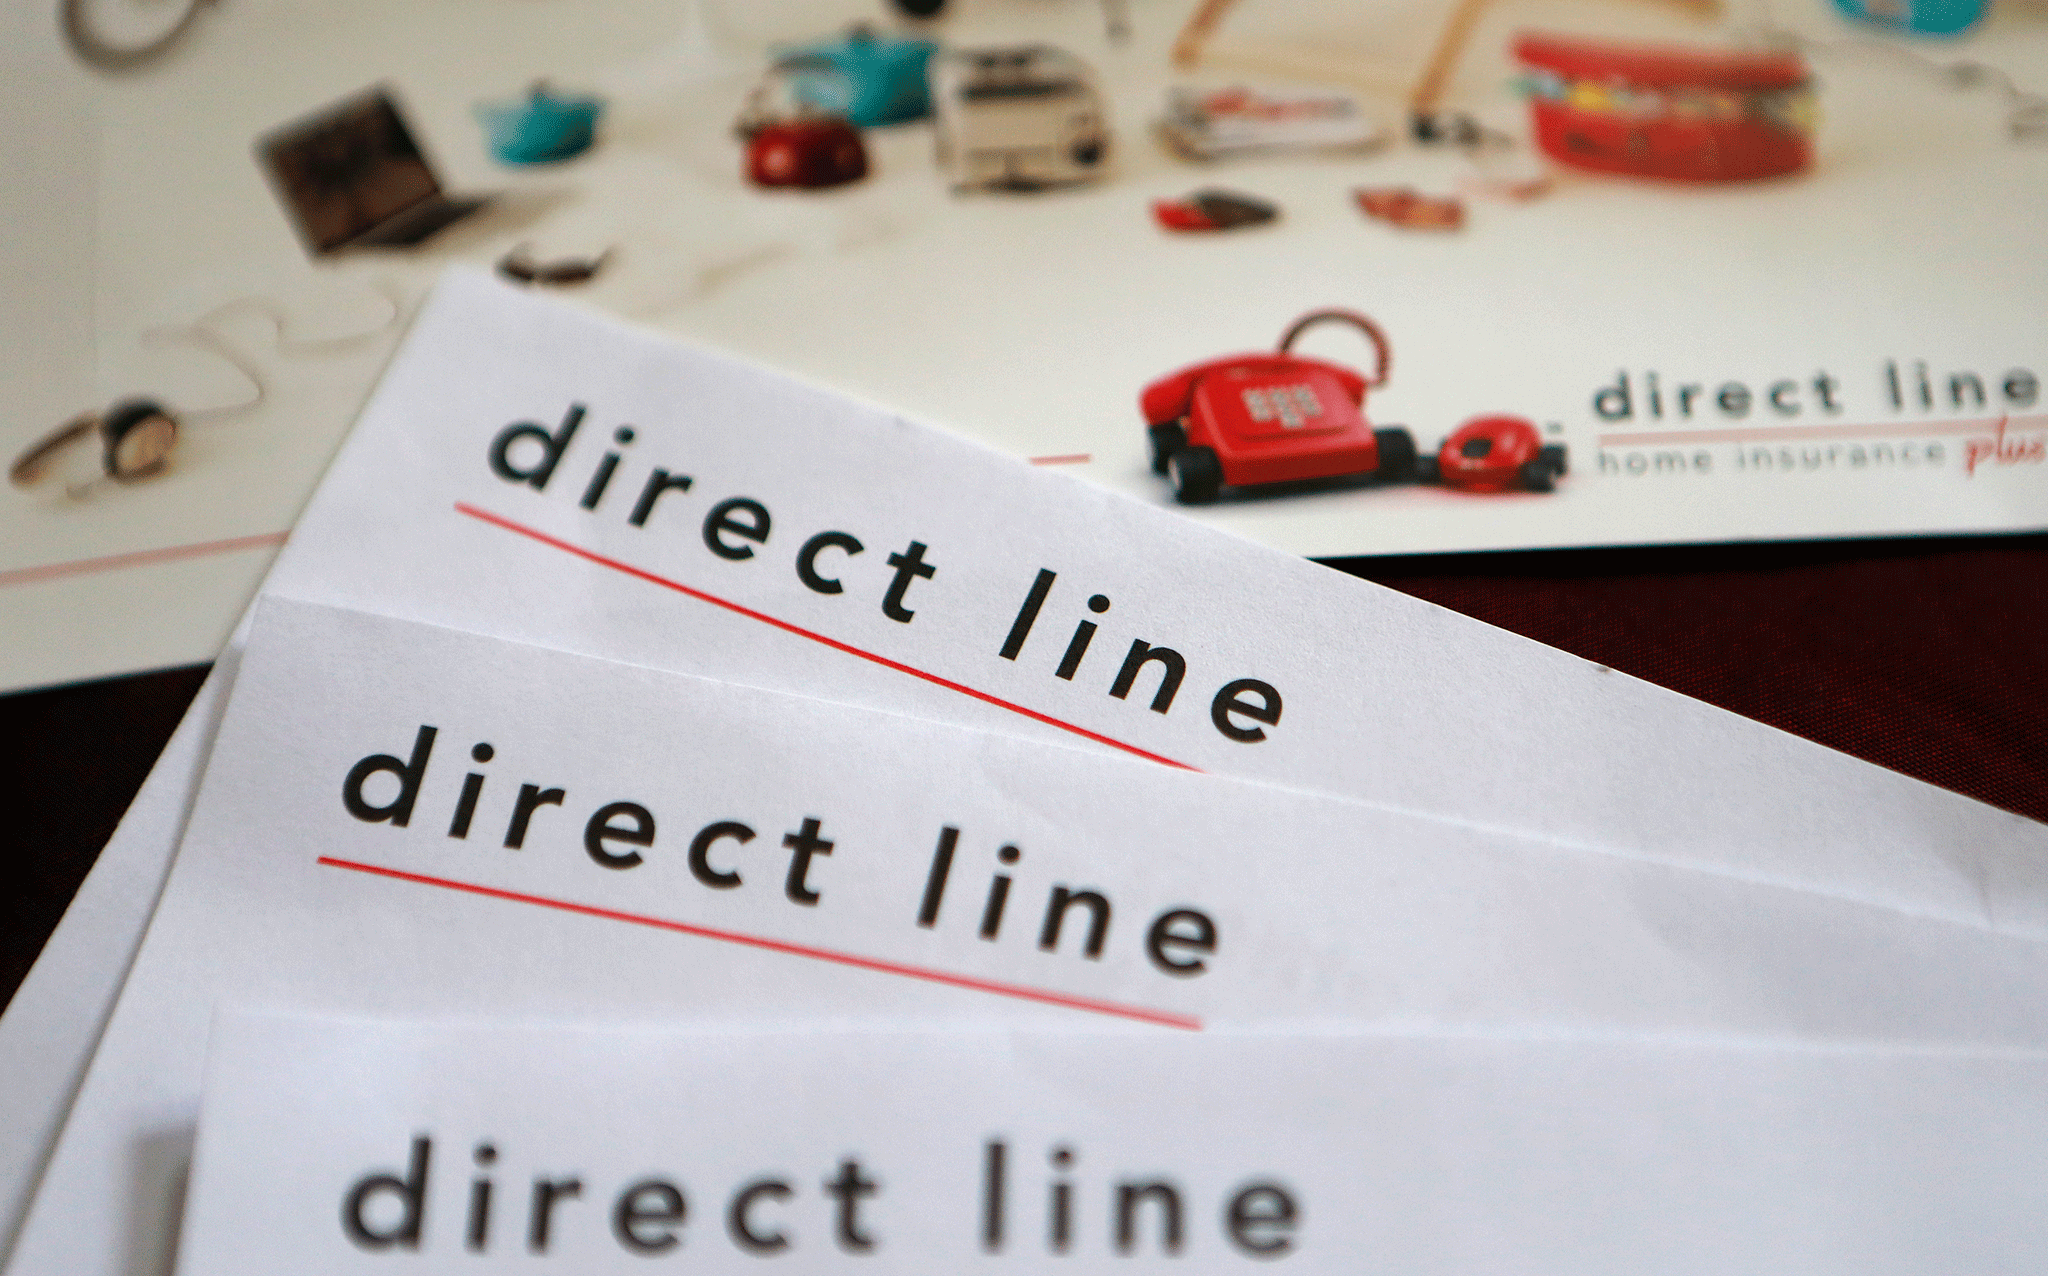 Direct Line has reported booming profits and dividends